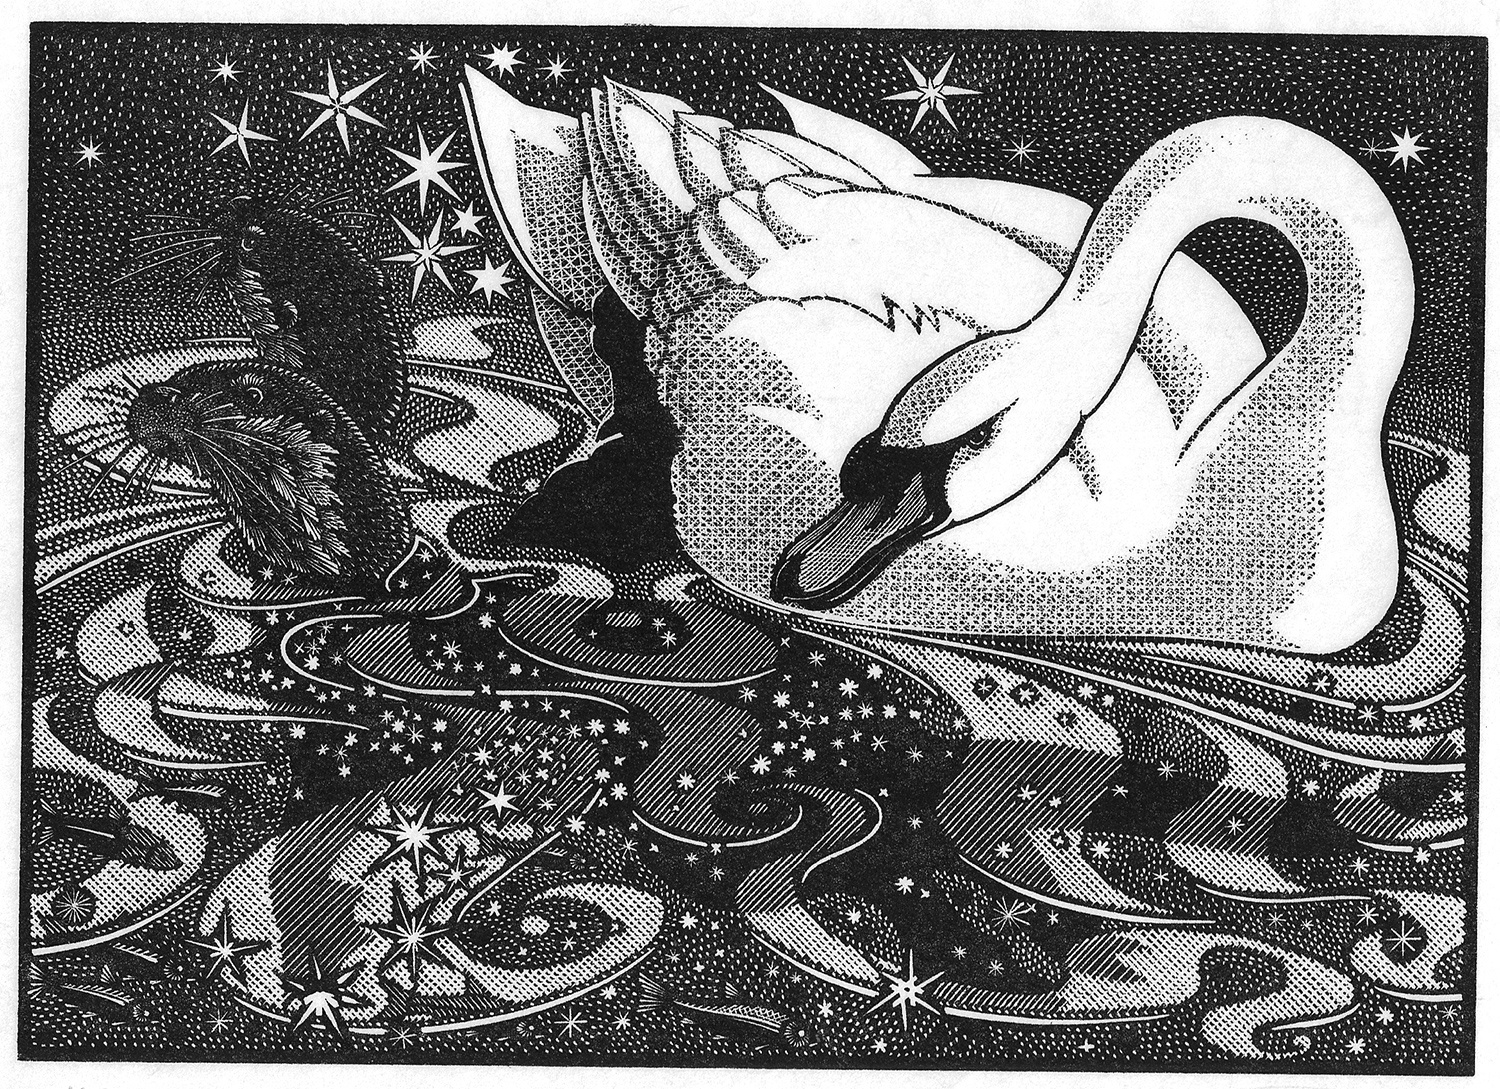 Nocturnal Encounters-Swan and Otters by Colin See-Paynton